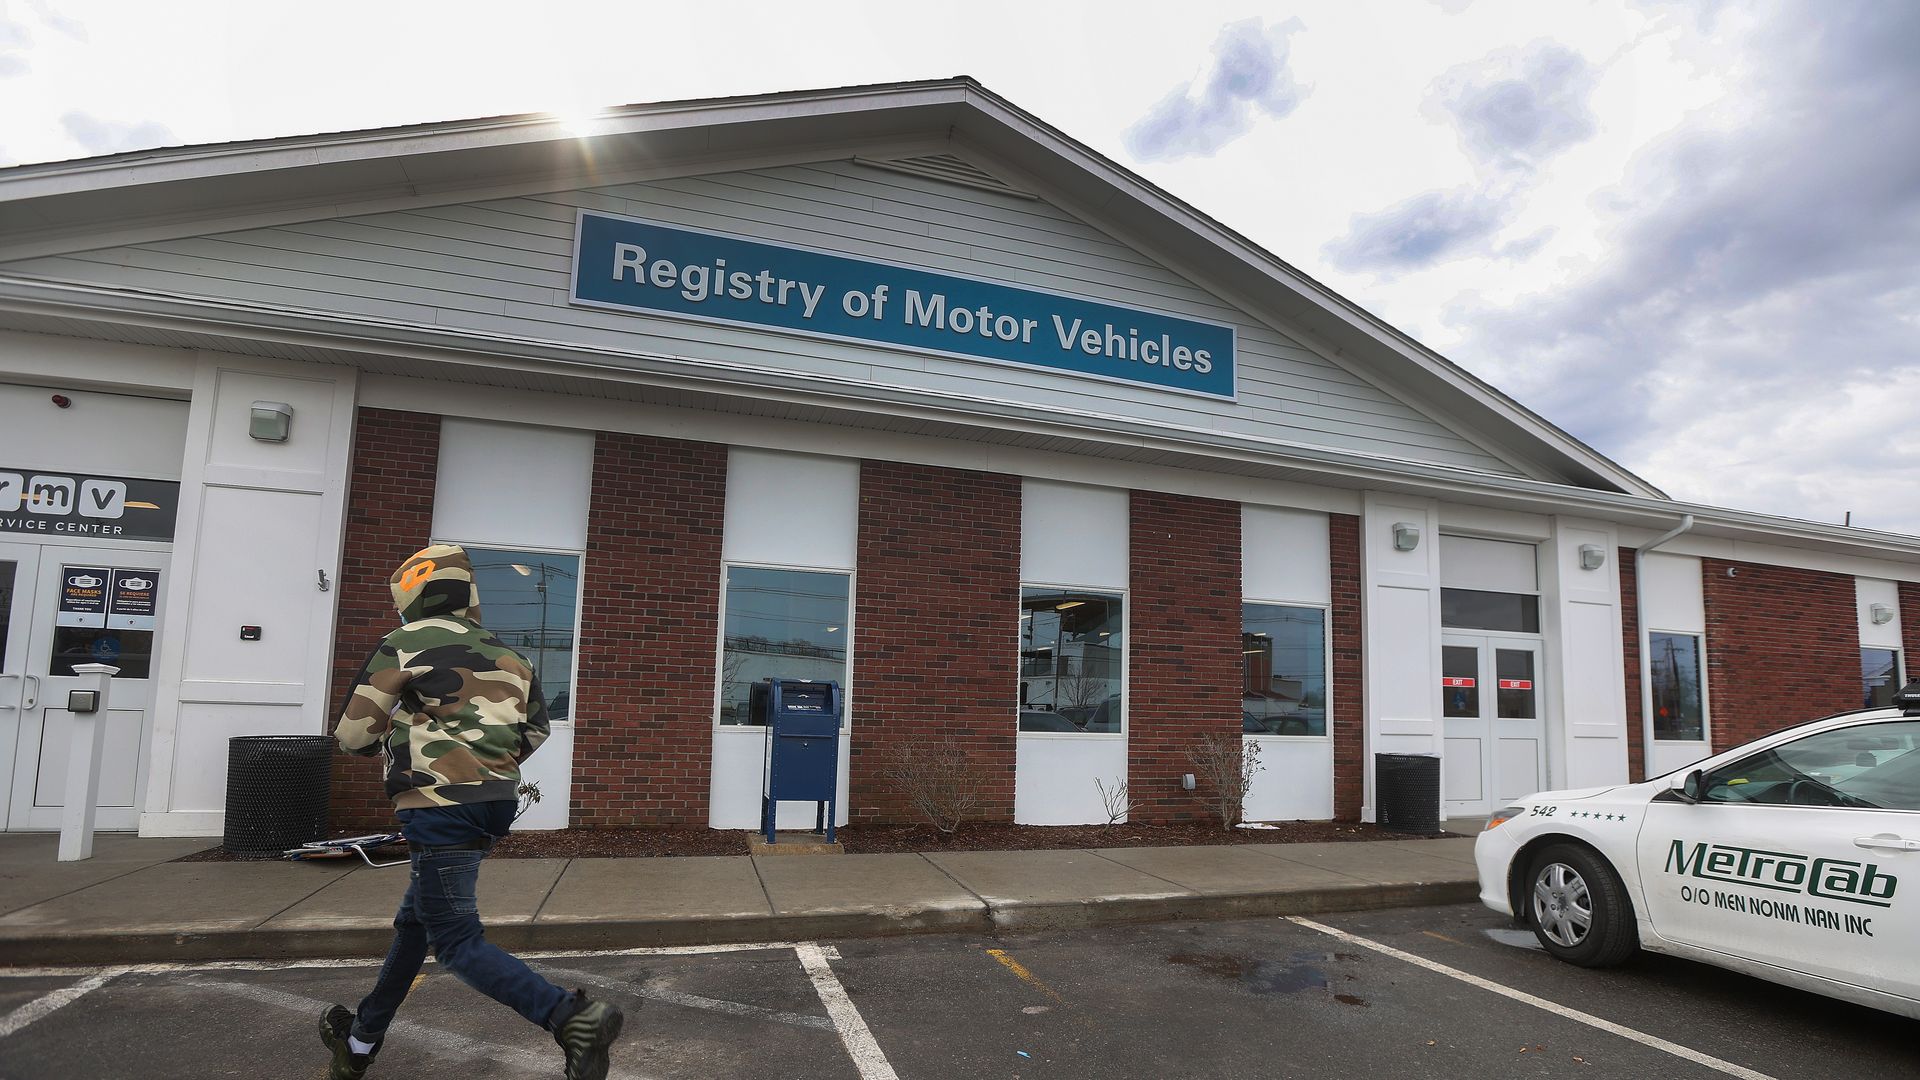 A person in an army camouflage jacket walks across the parking lot of a Registry of Motor Vehicles office.